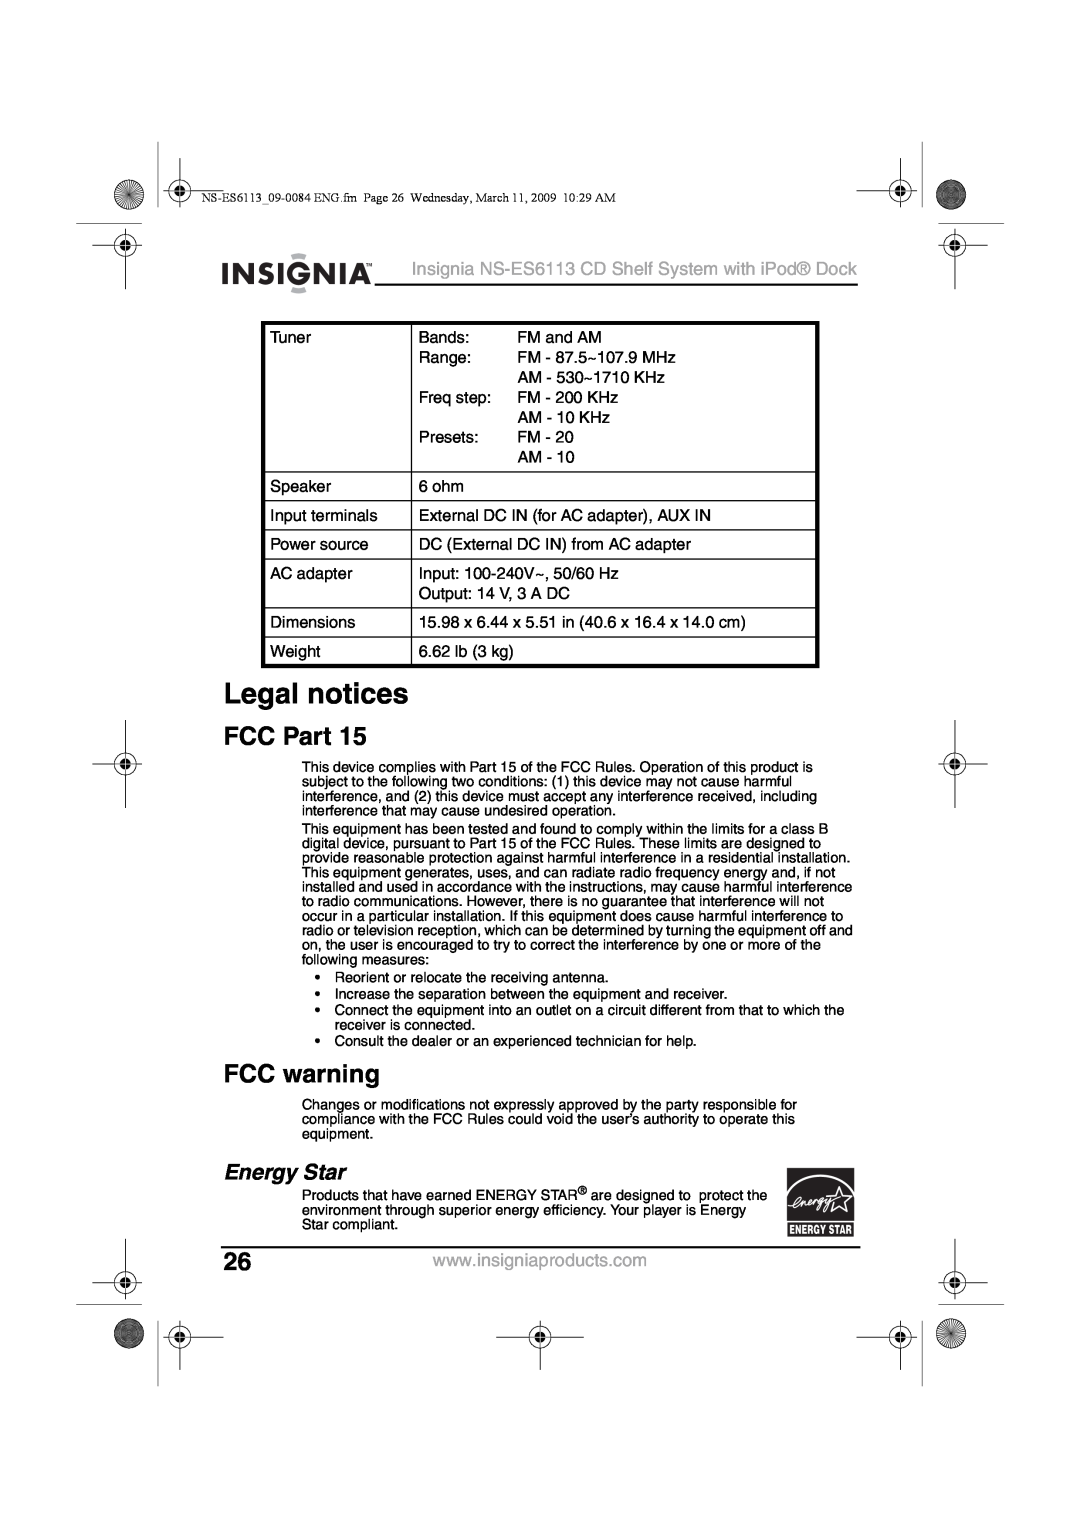 Insignia manual Legal notices, FCC Part, FCC warning, Energy Star, Insignia NS-ES6113CD Shelf System with iPod Dock 